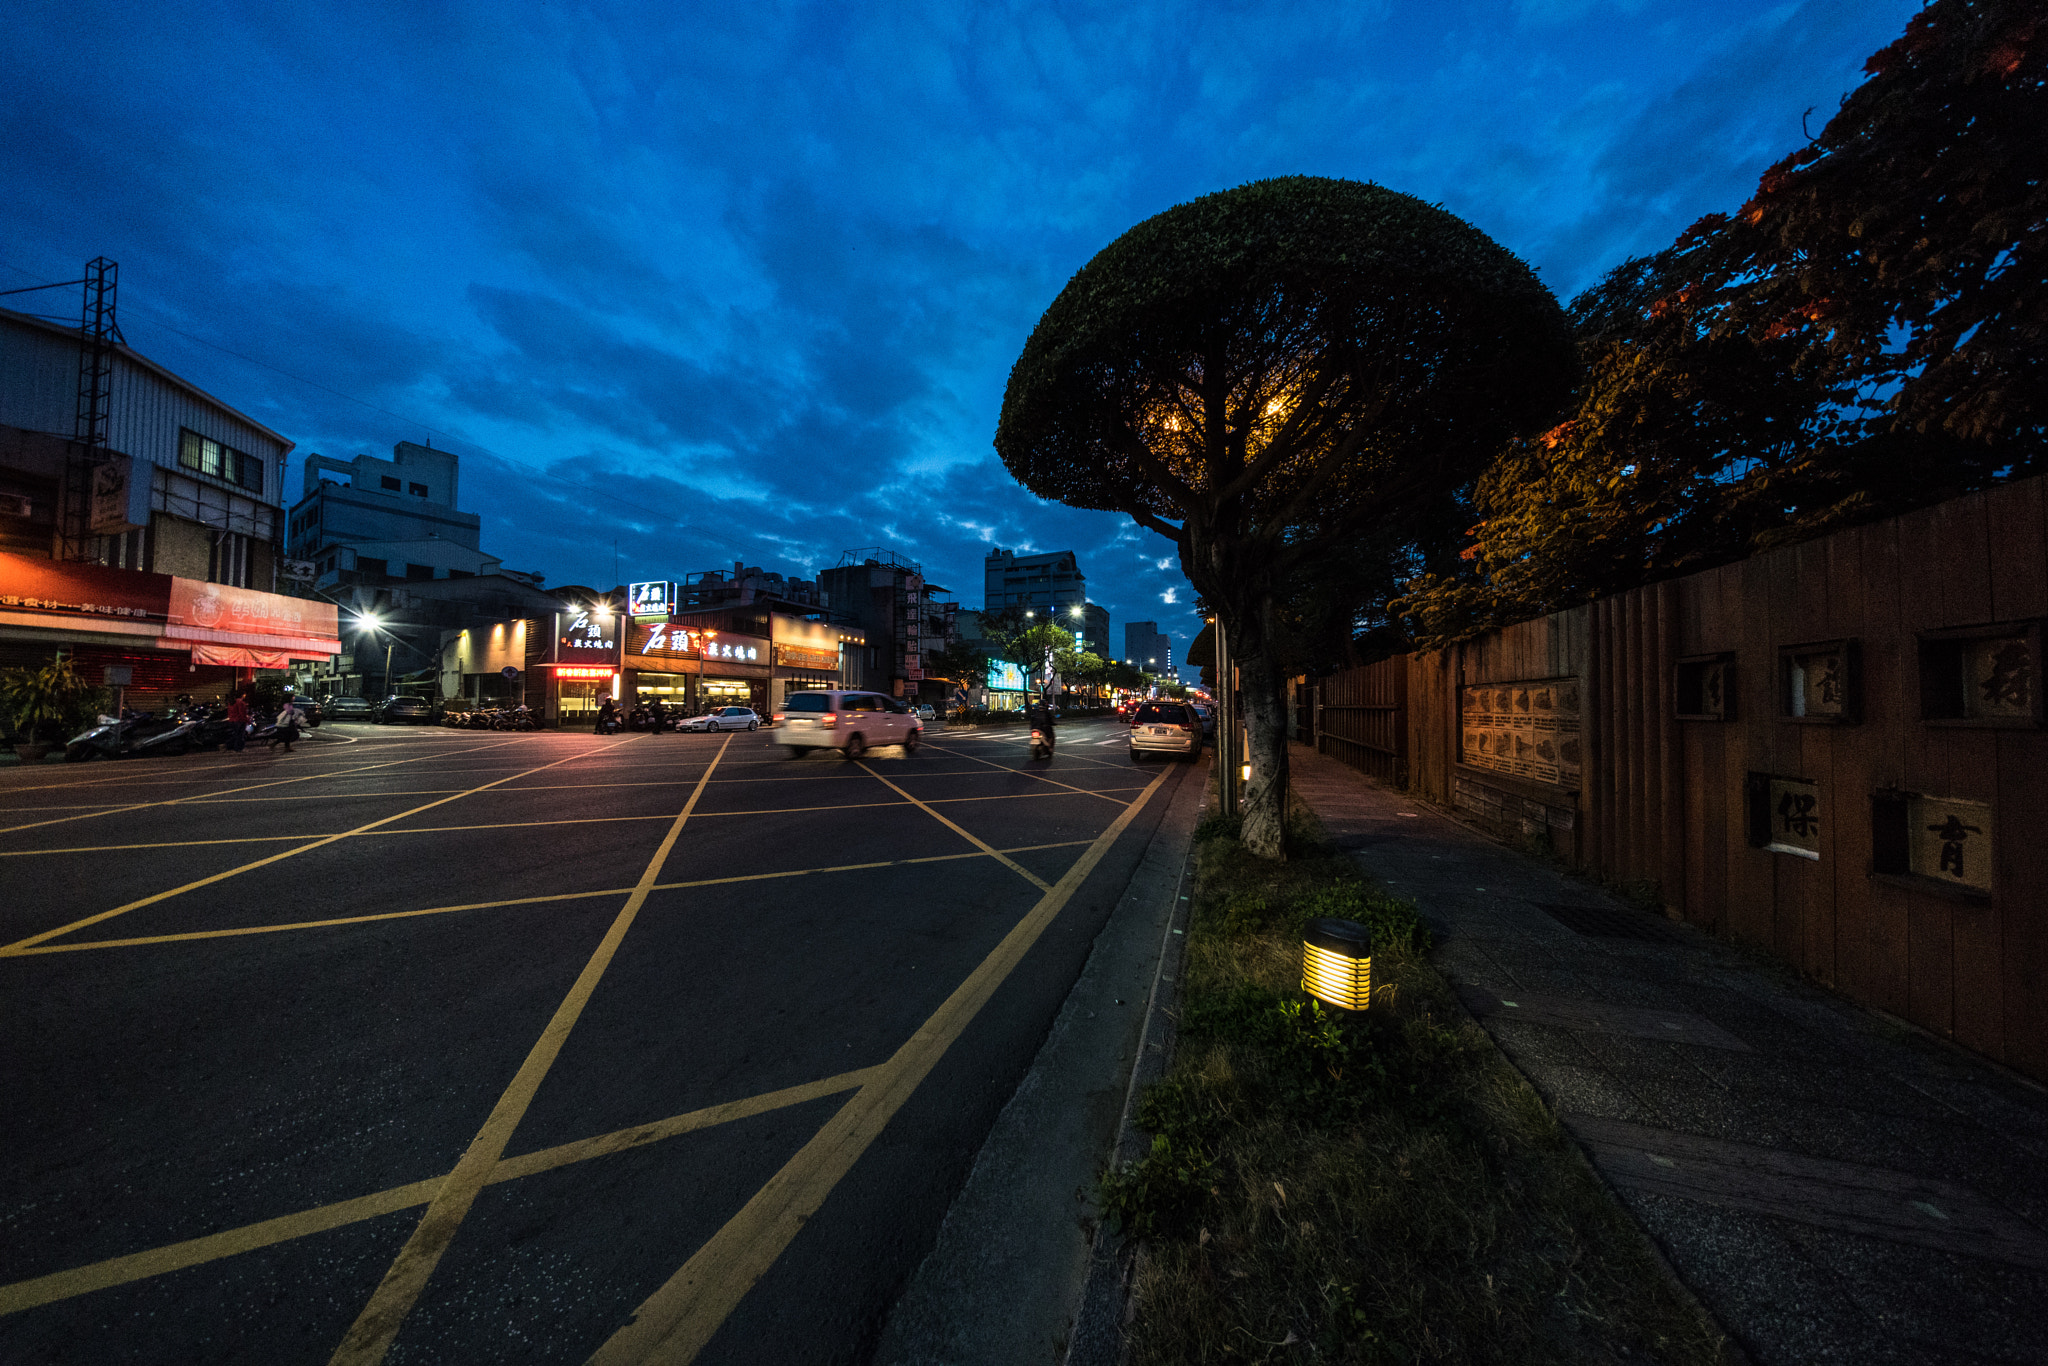 Sony a7R II sample photo. A street scene after the sunset in chiayi, taiwan. photography